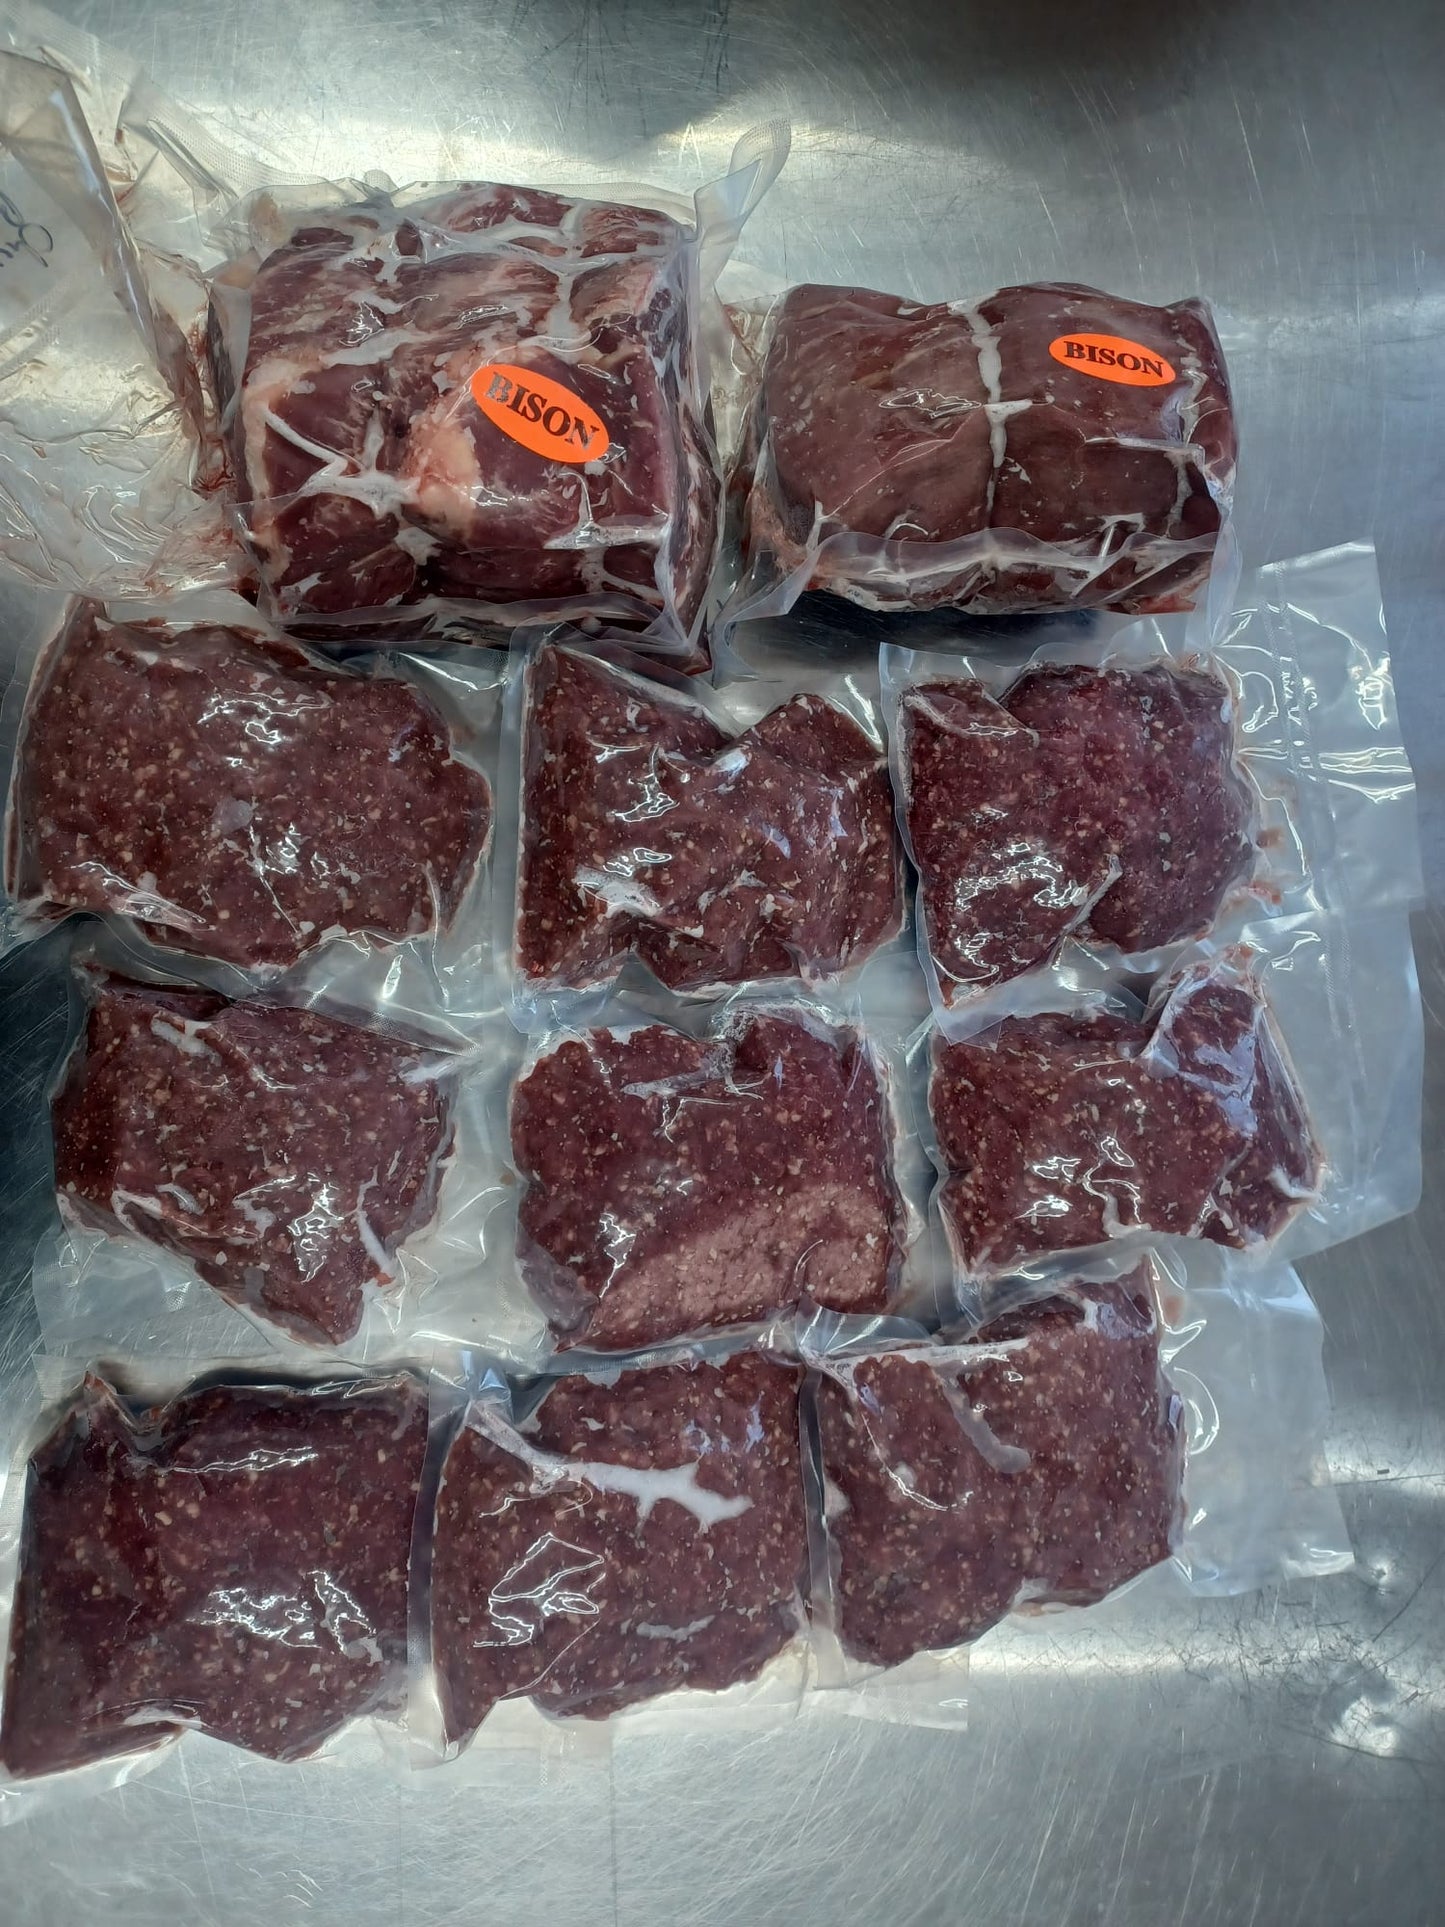 Boxed frozen Bison meat- 15 lb slow cooker pack